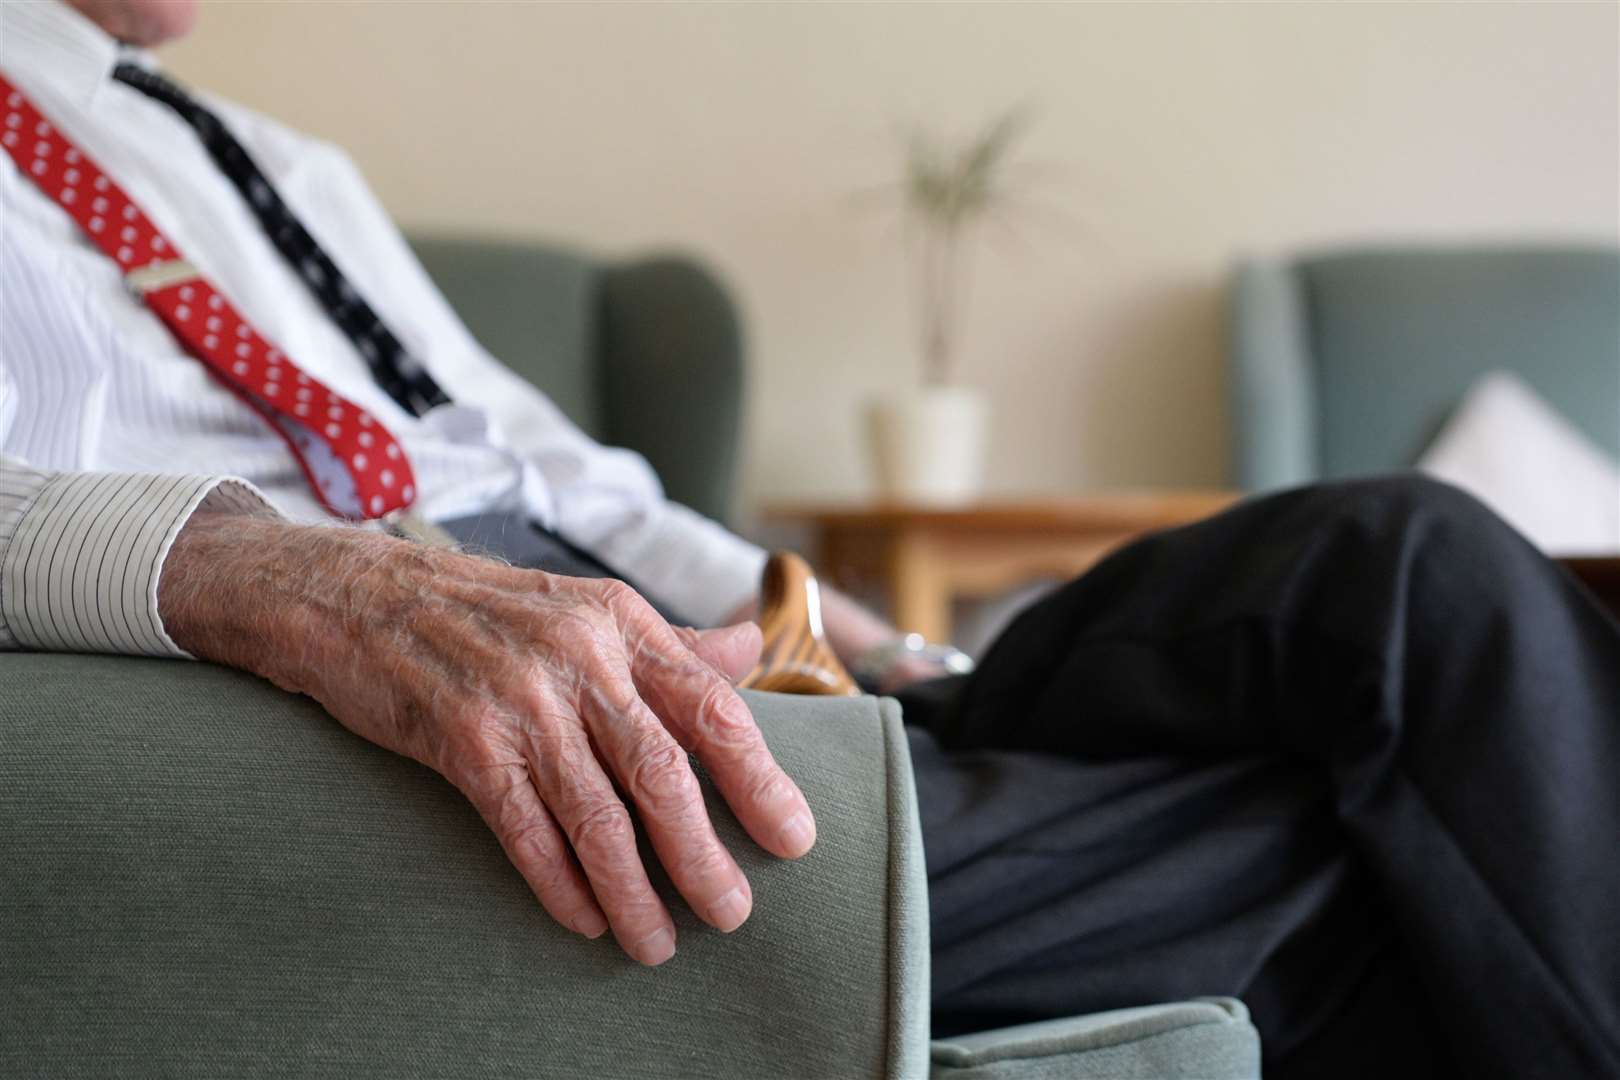 Elliott House care home in Herne Bay was plunged into special measures after inspectors slapped it with a rating of "inadequate". Stock image: PA/Joe Giddens